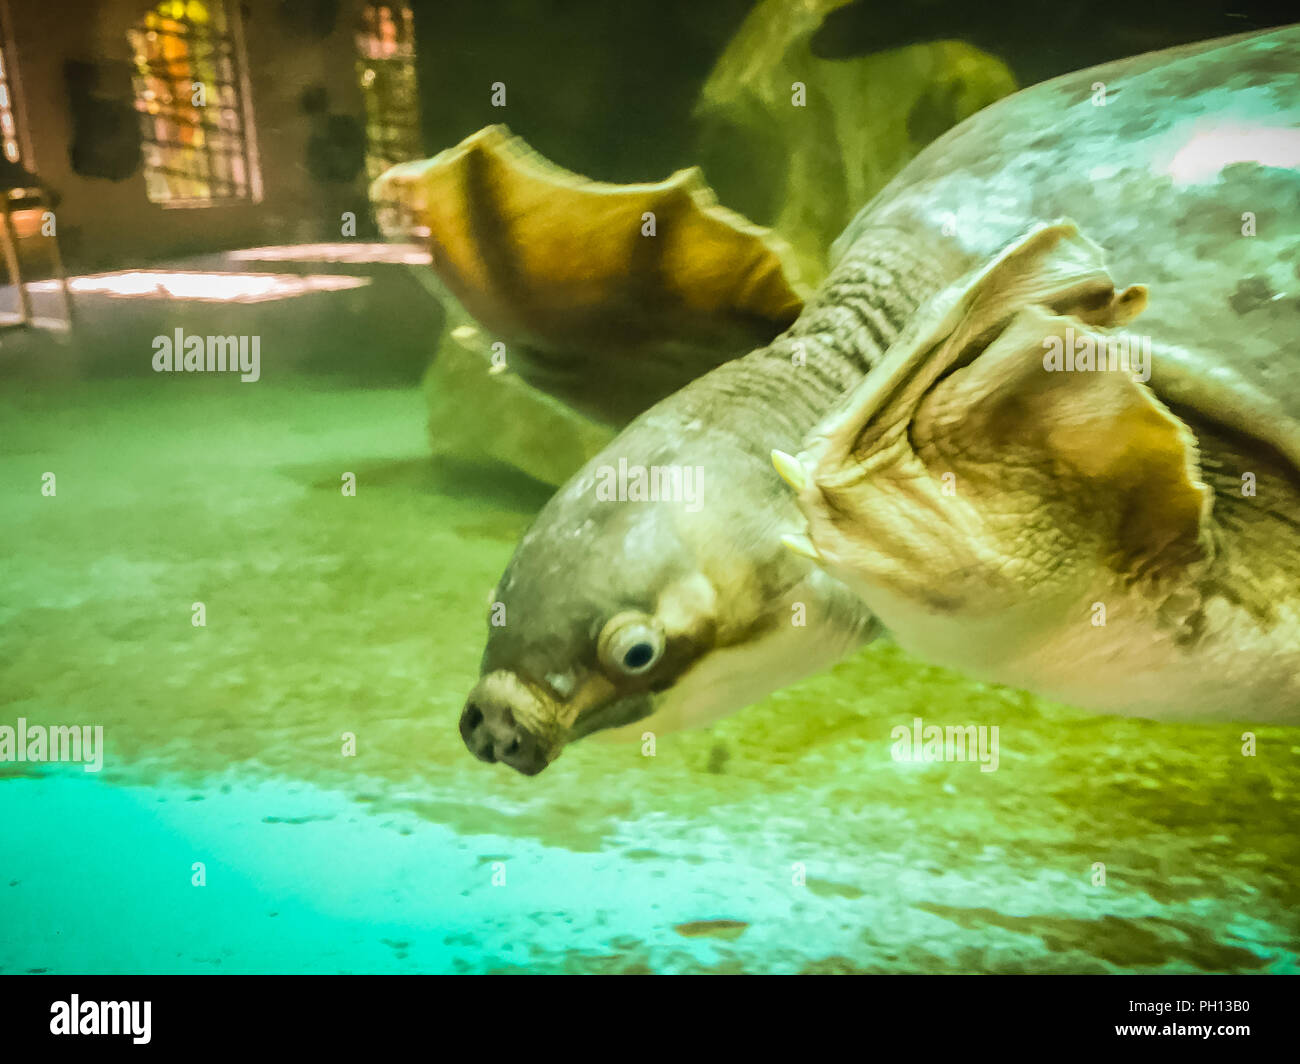 long-necked turtle (snake-necked turtle) is swimming in the glass pond. Stock Photo